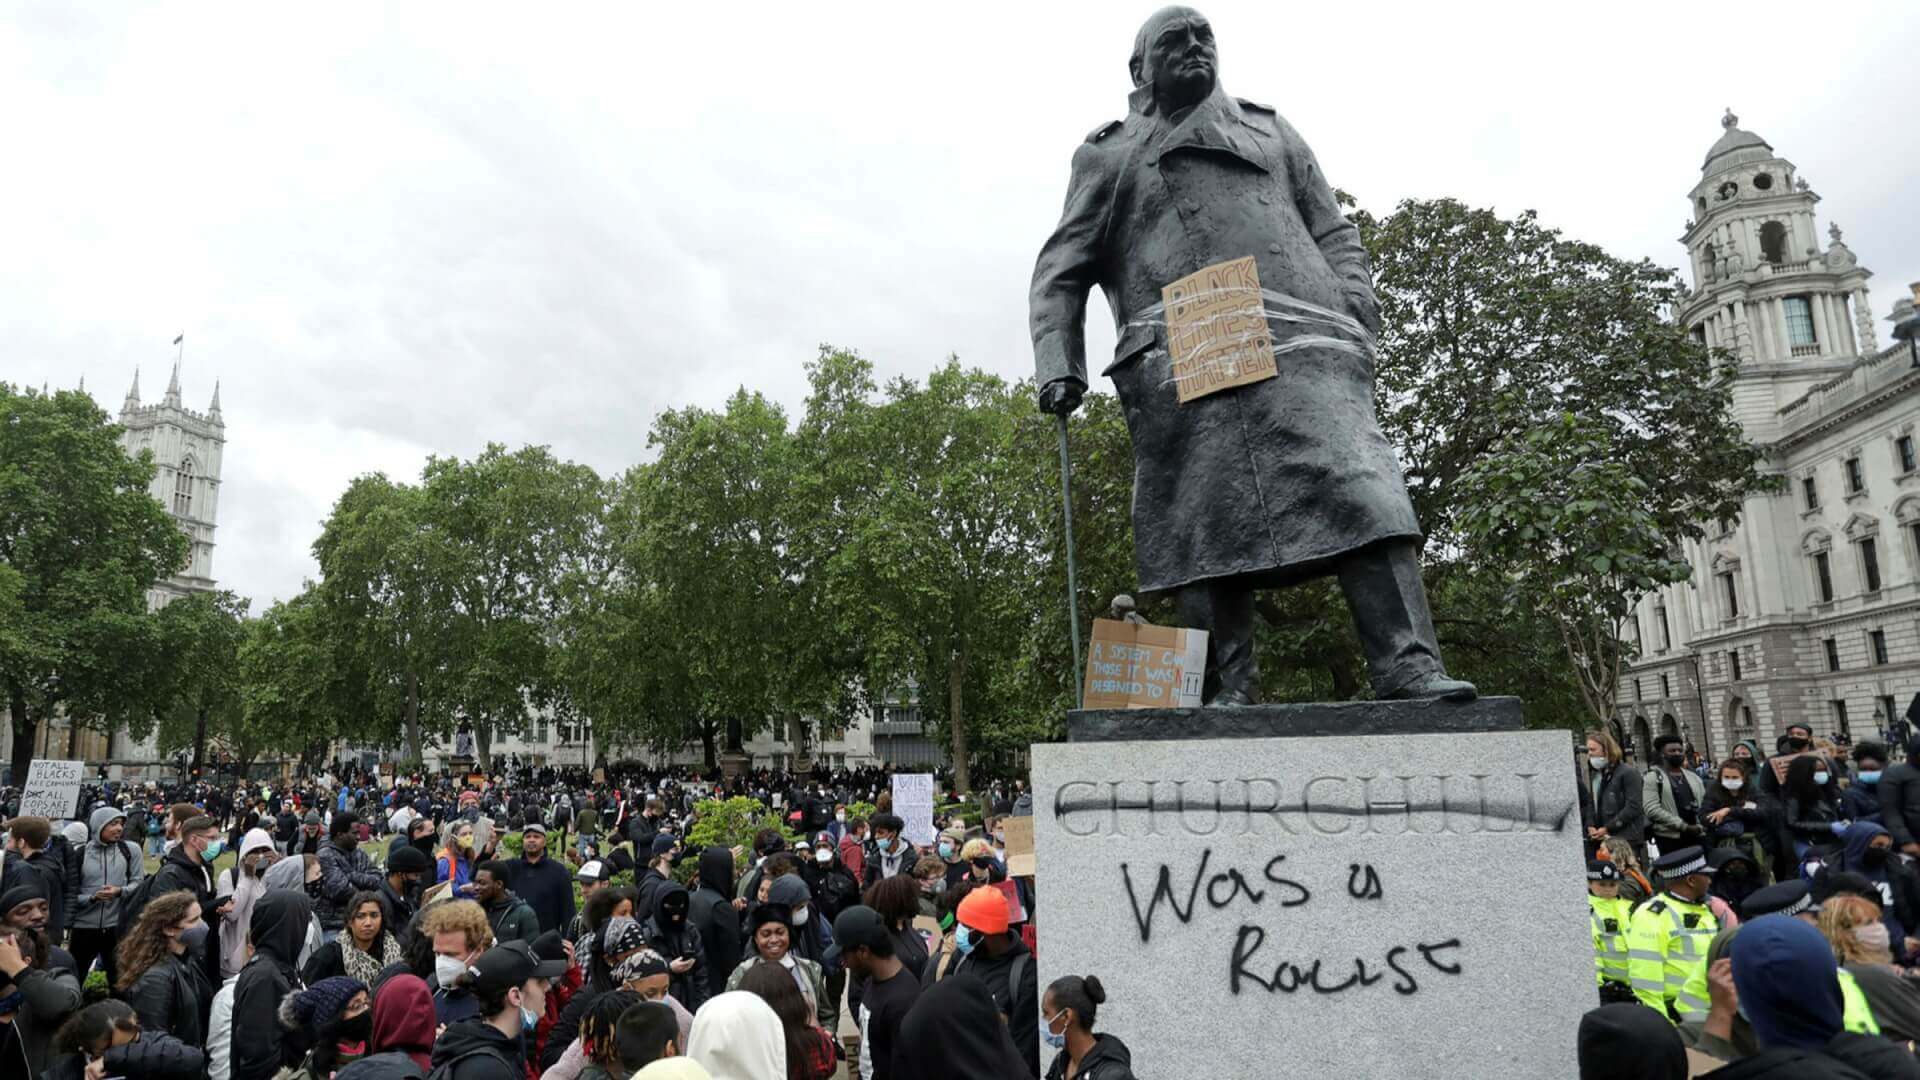 PM Johnson Establishes Race Inequality Commission, But Vows to Protect Churchill Statue